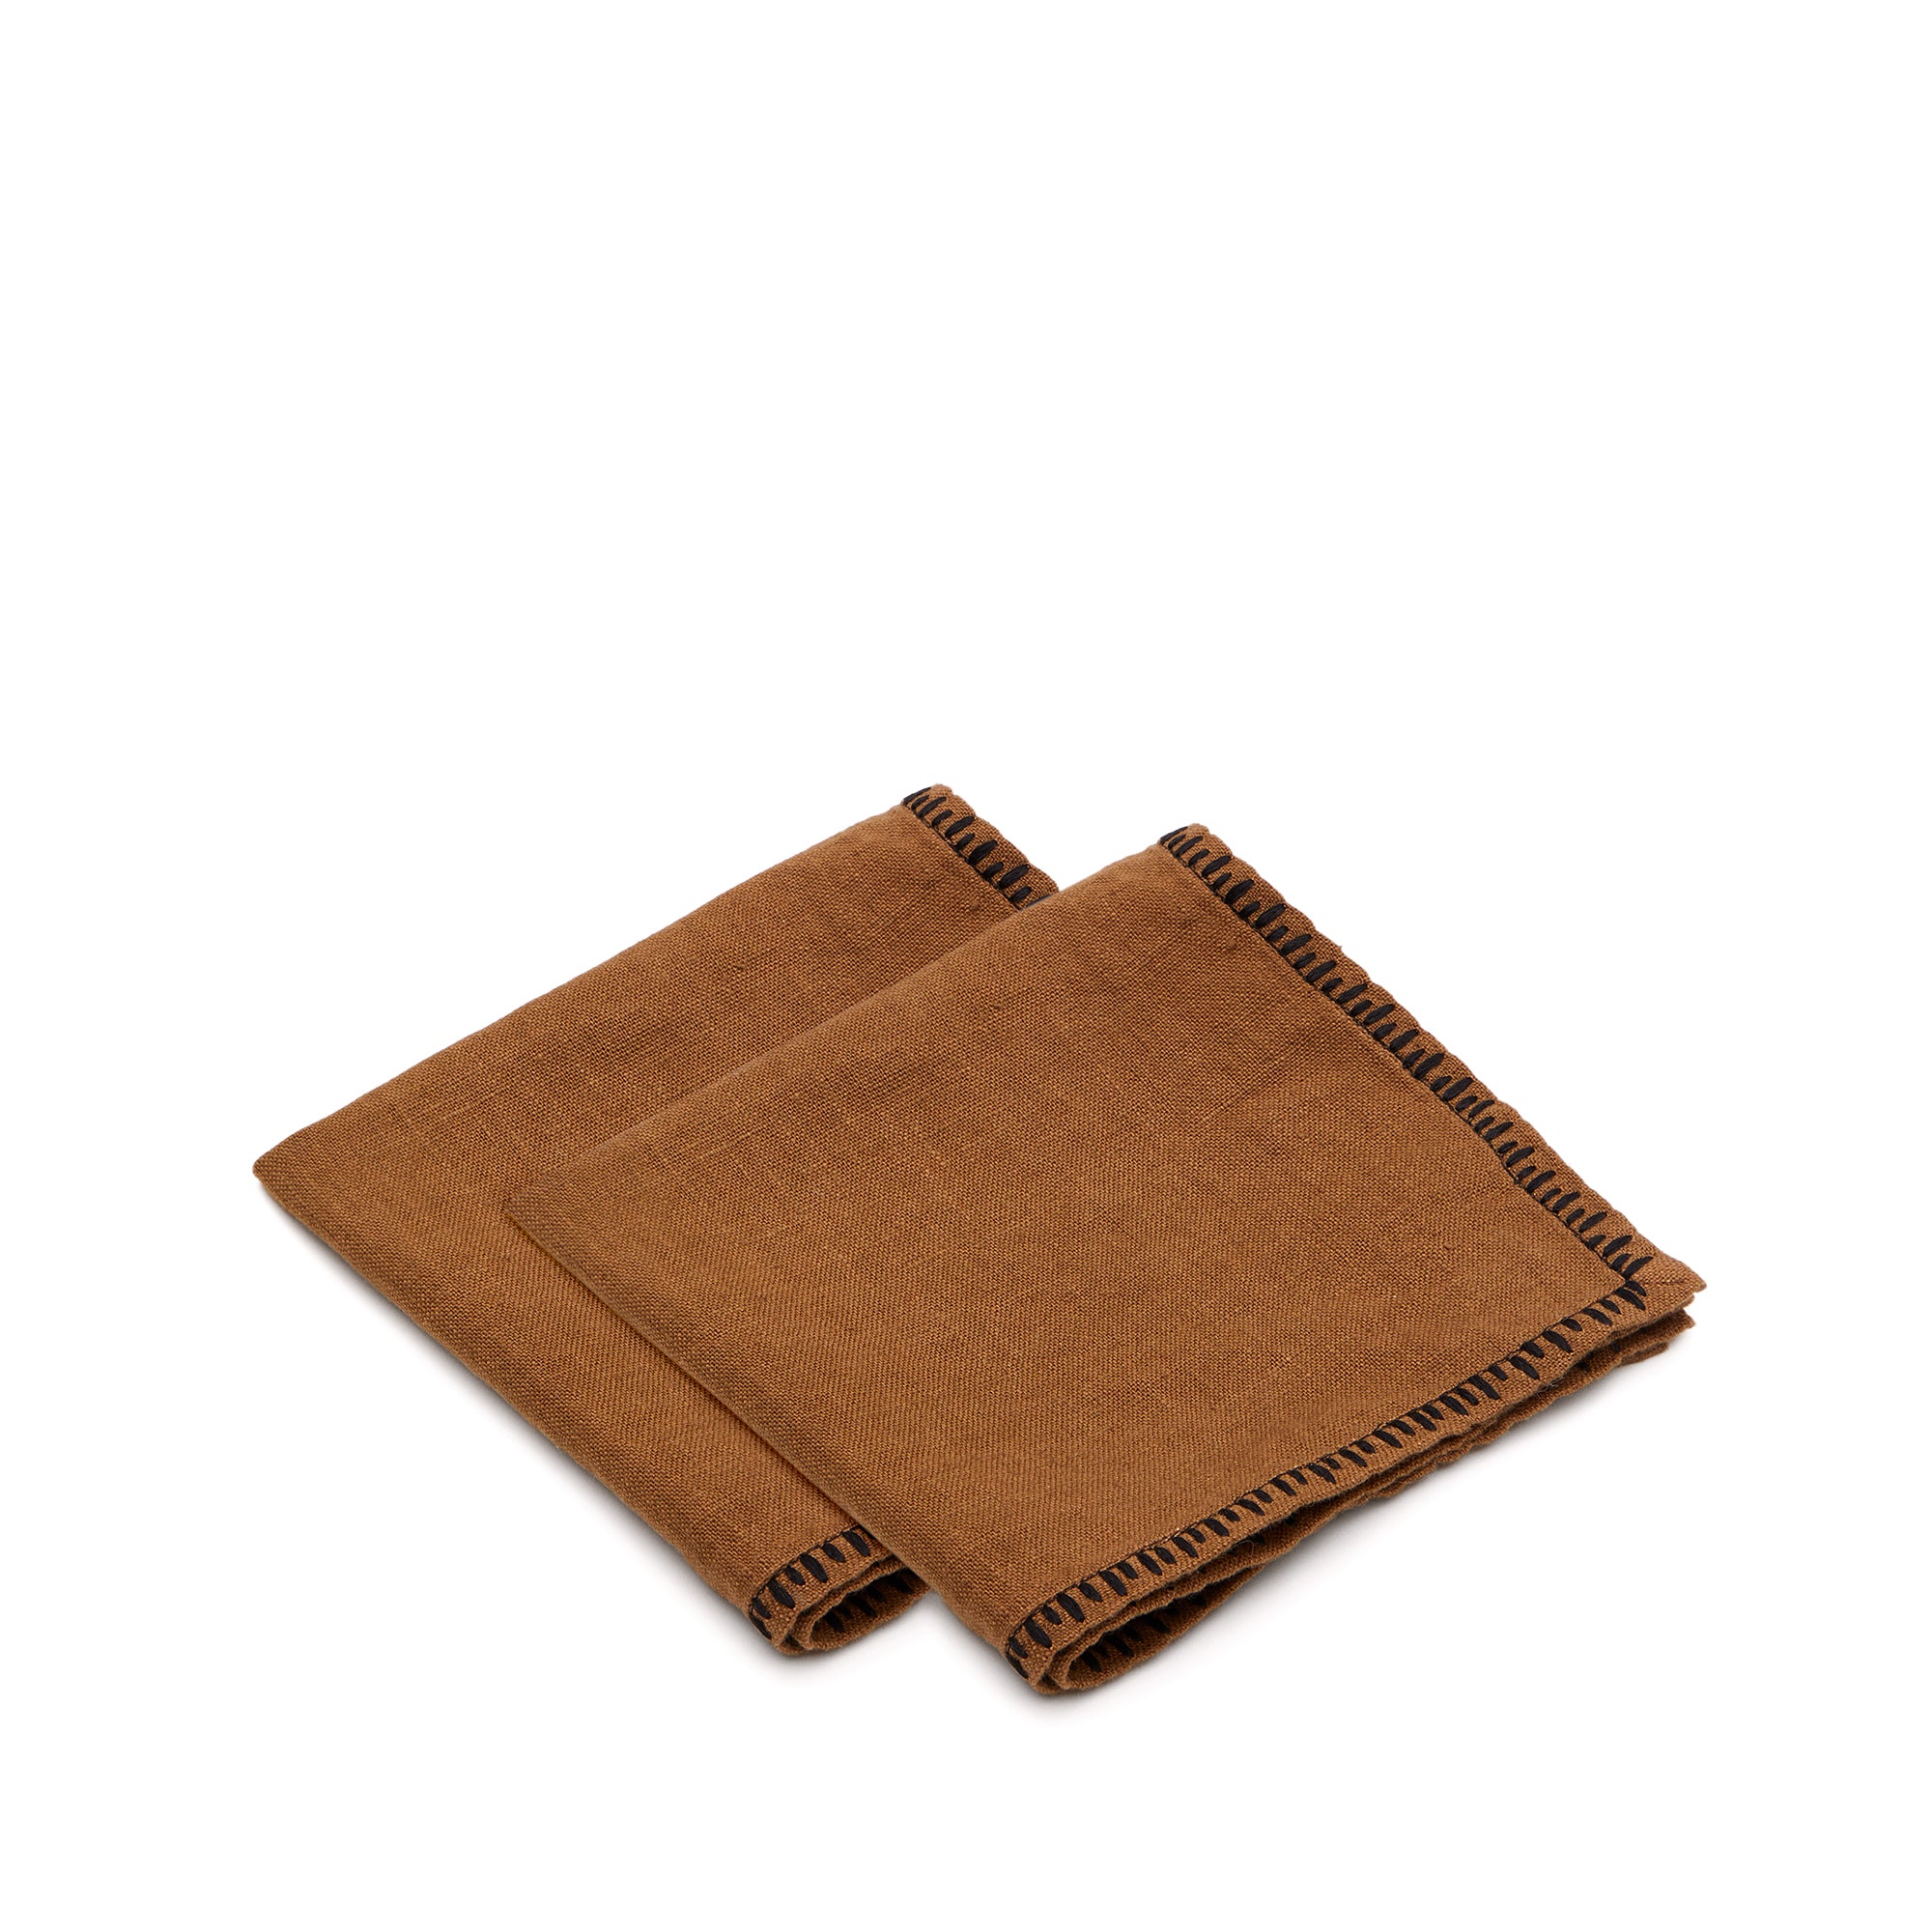 Llosar set of 2 brown embroidered napkins made of 100% linen